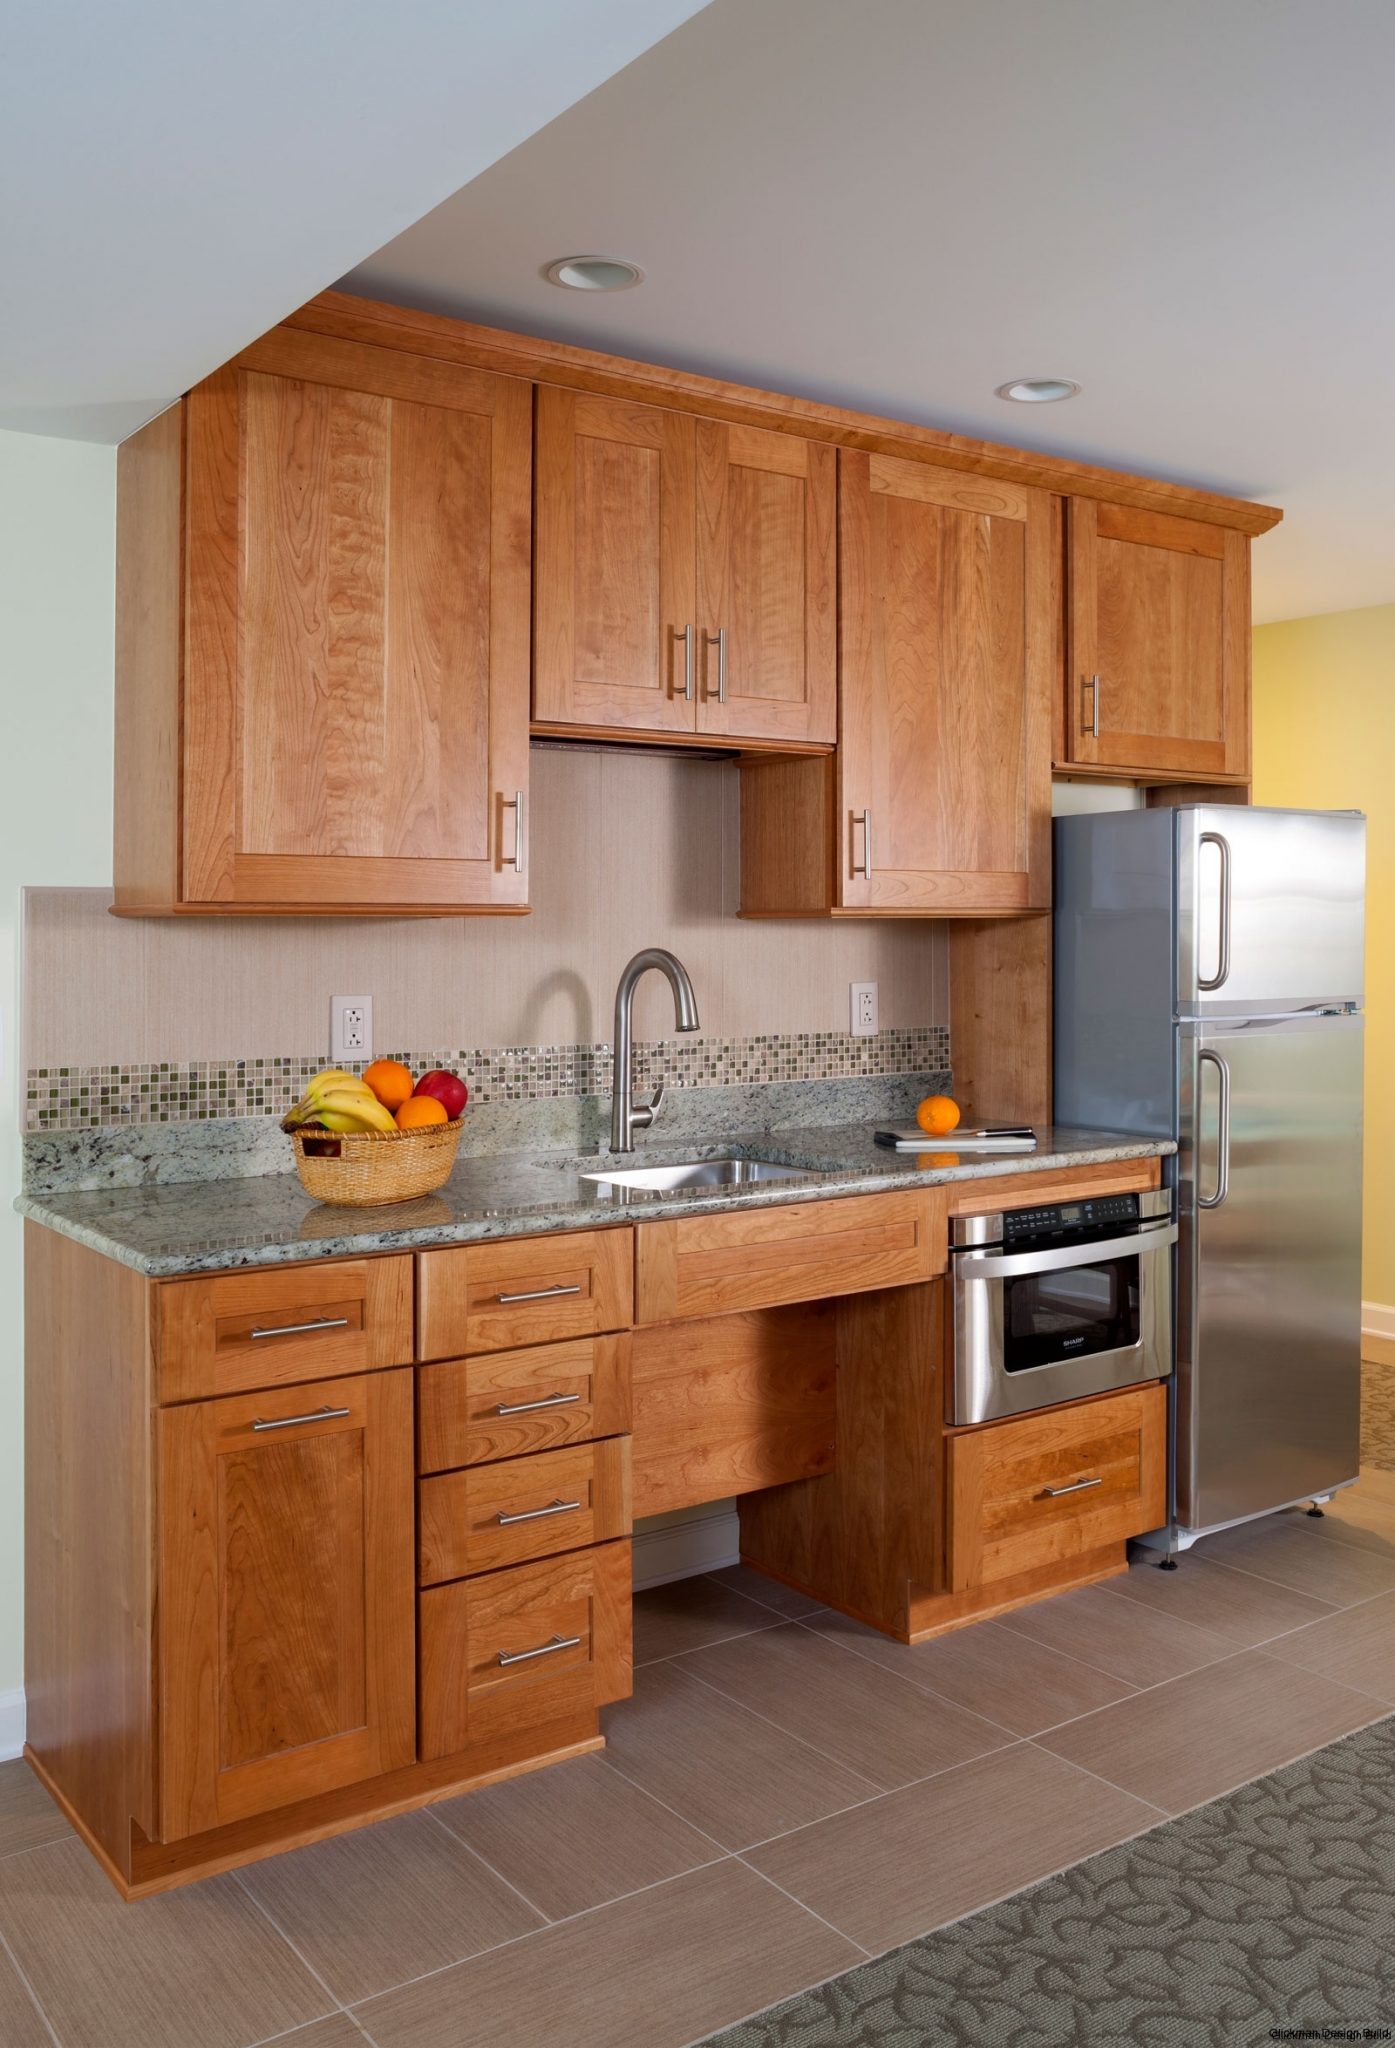 Aging-in-Place Remodeling Checklist for Your Kitchen | Glickman